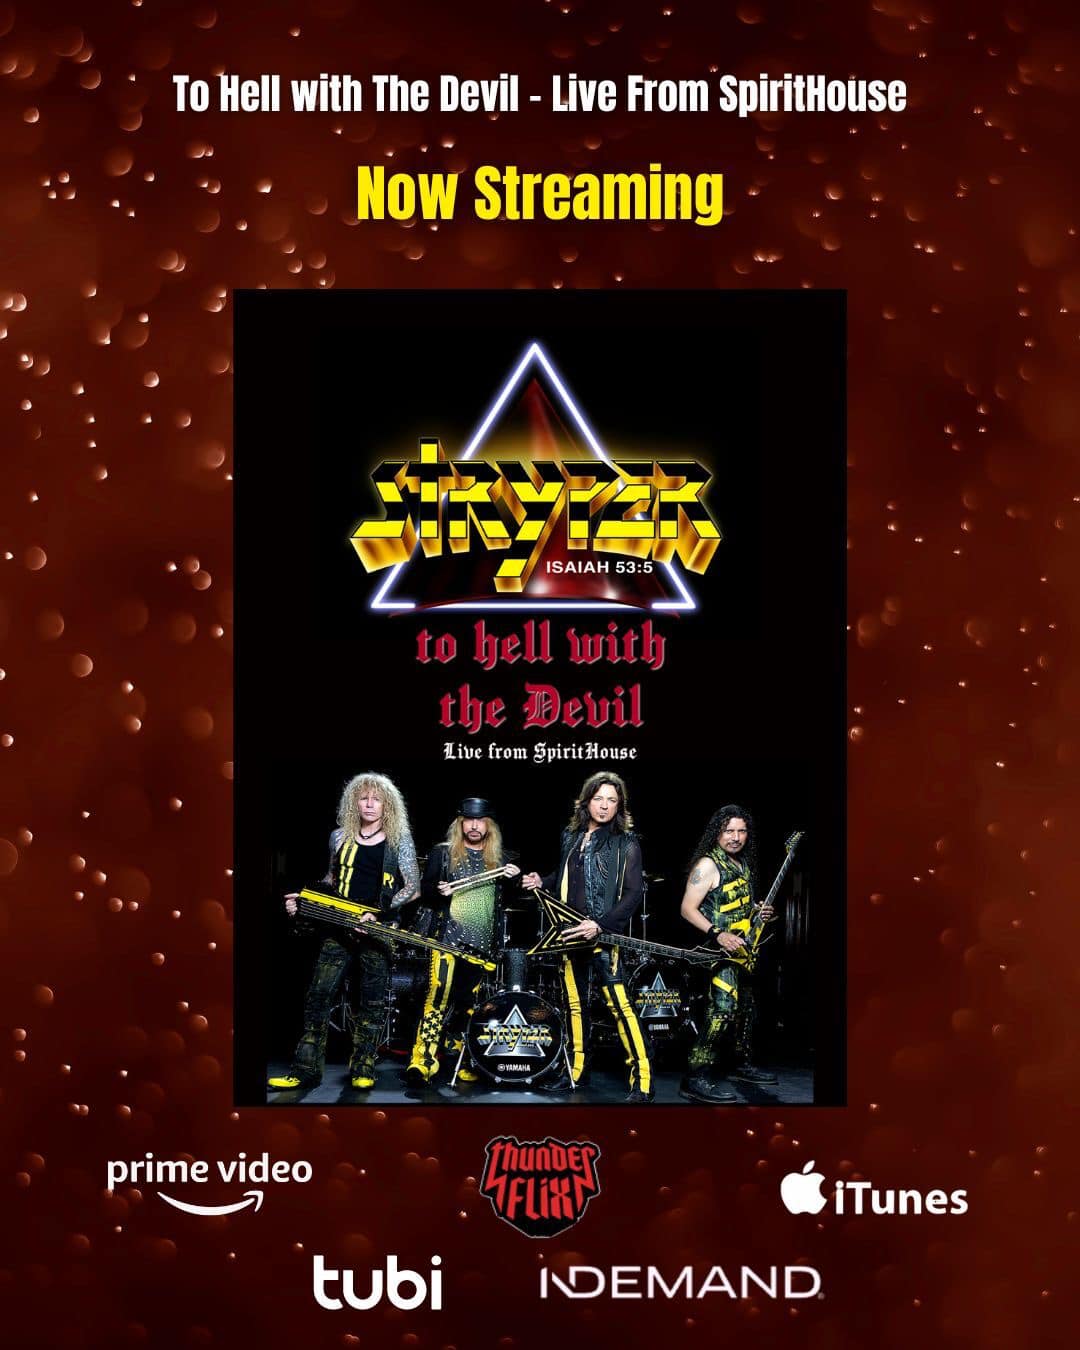 You Can Now Watch The Video Concert Of Stryper To Hell with the Devil, Live from SpiritHouse On Multiple Streaming Platforms